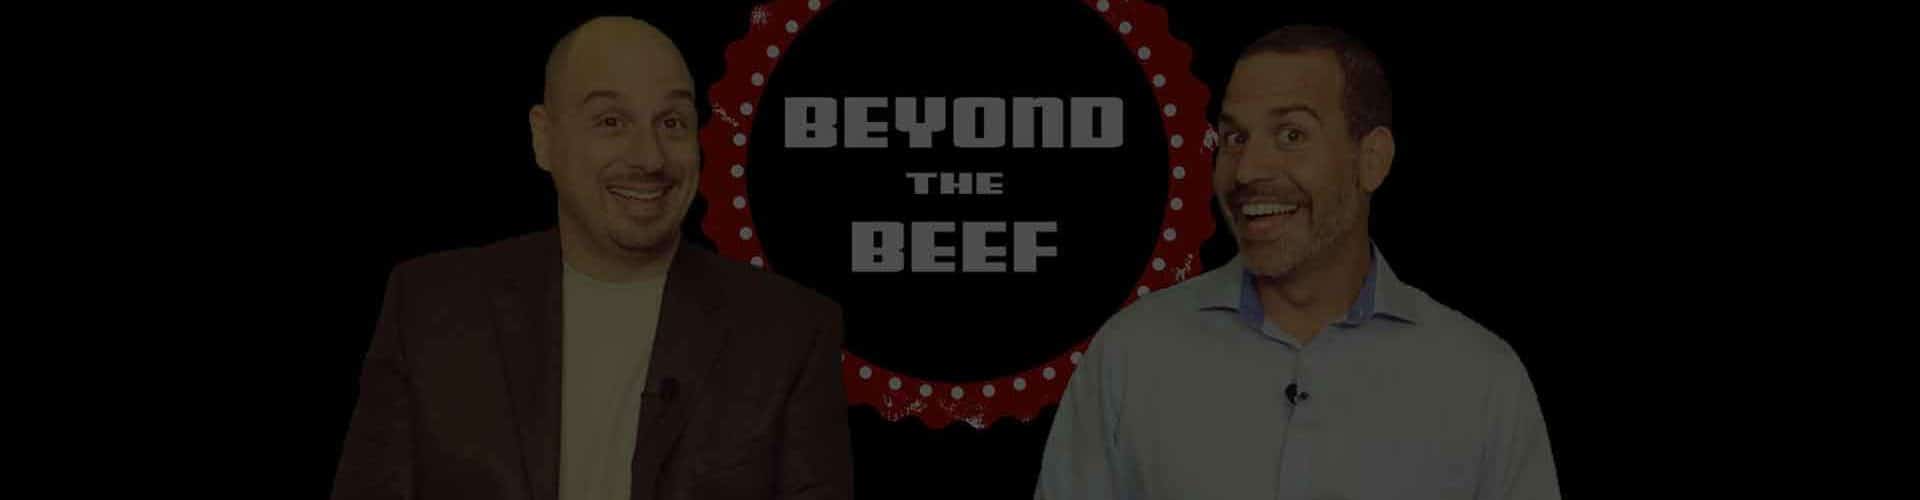 Beyond The Beef - Turn Your Business Problems Into Business Solutions